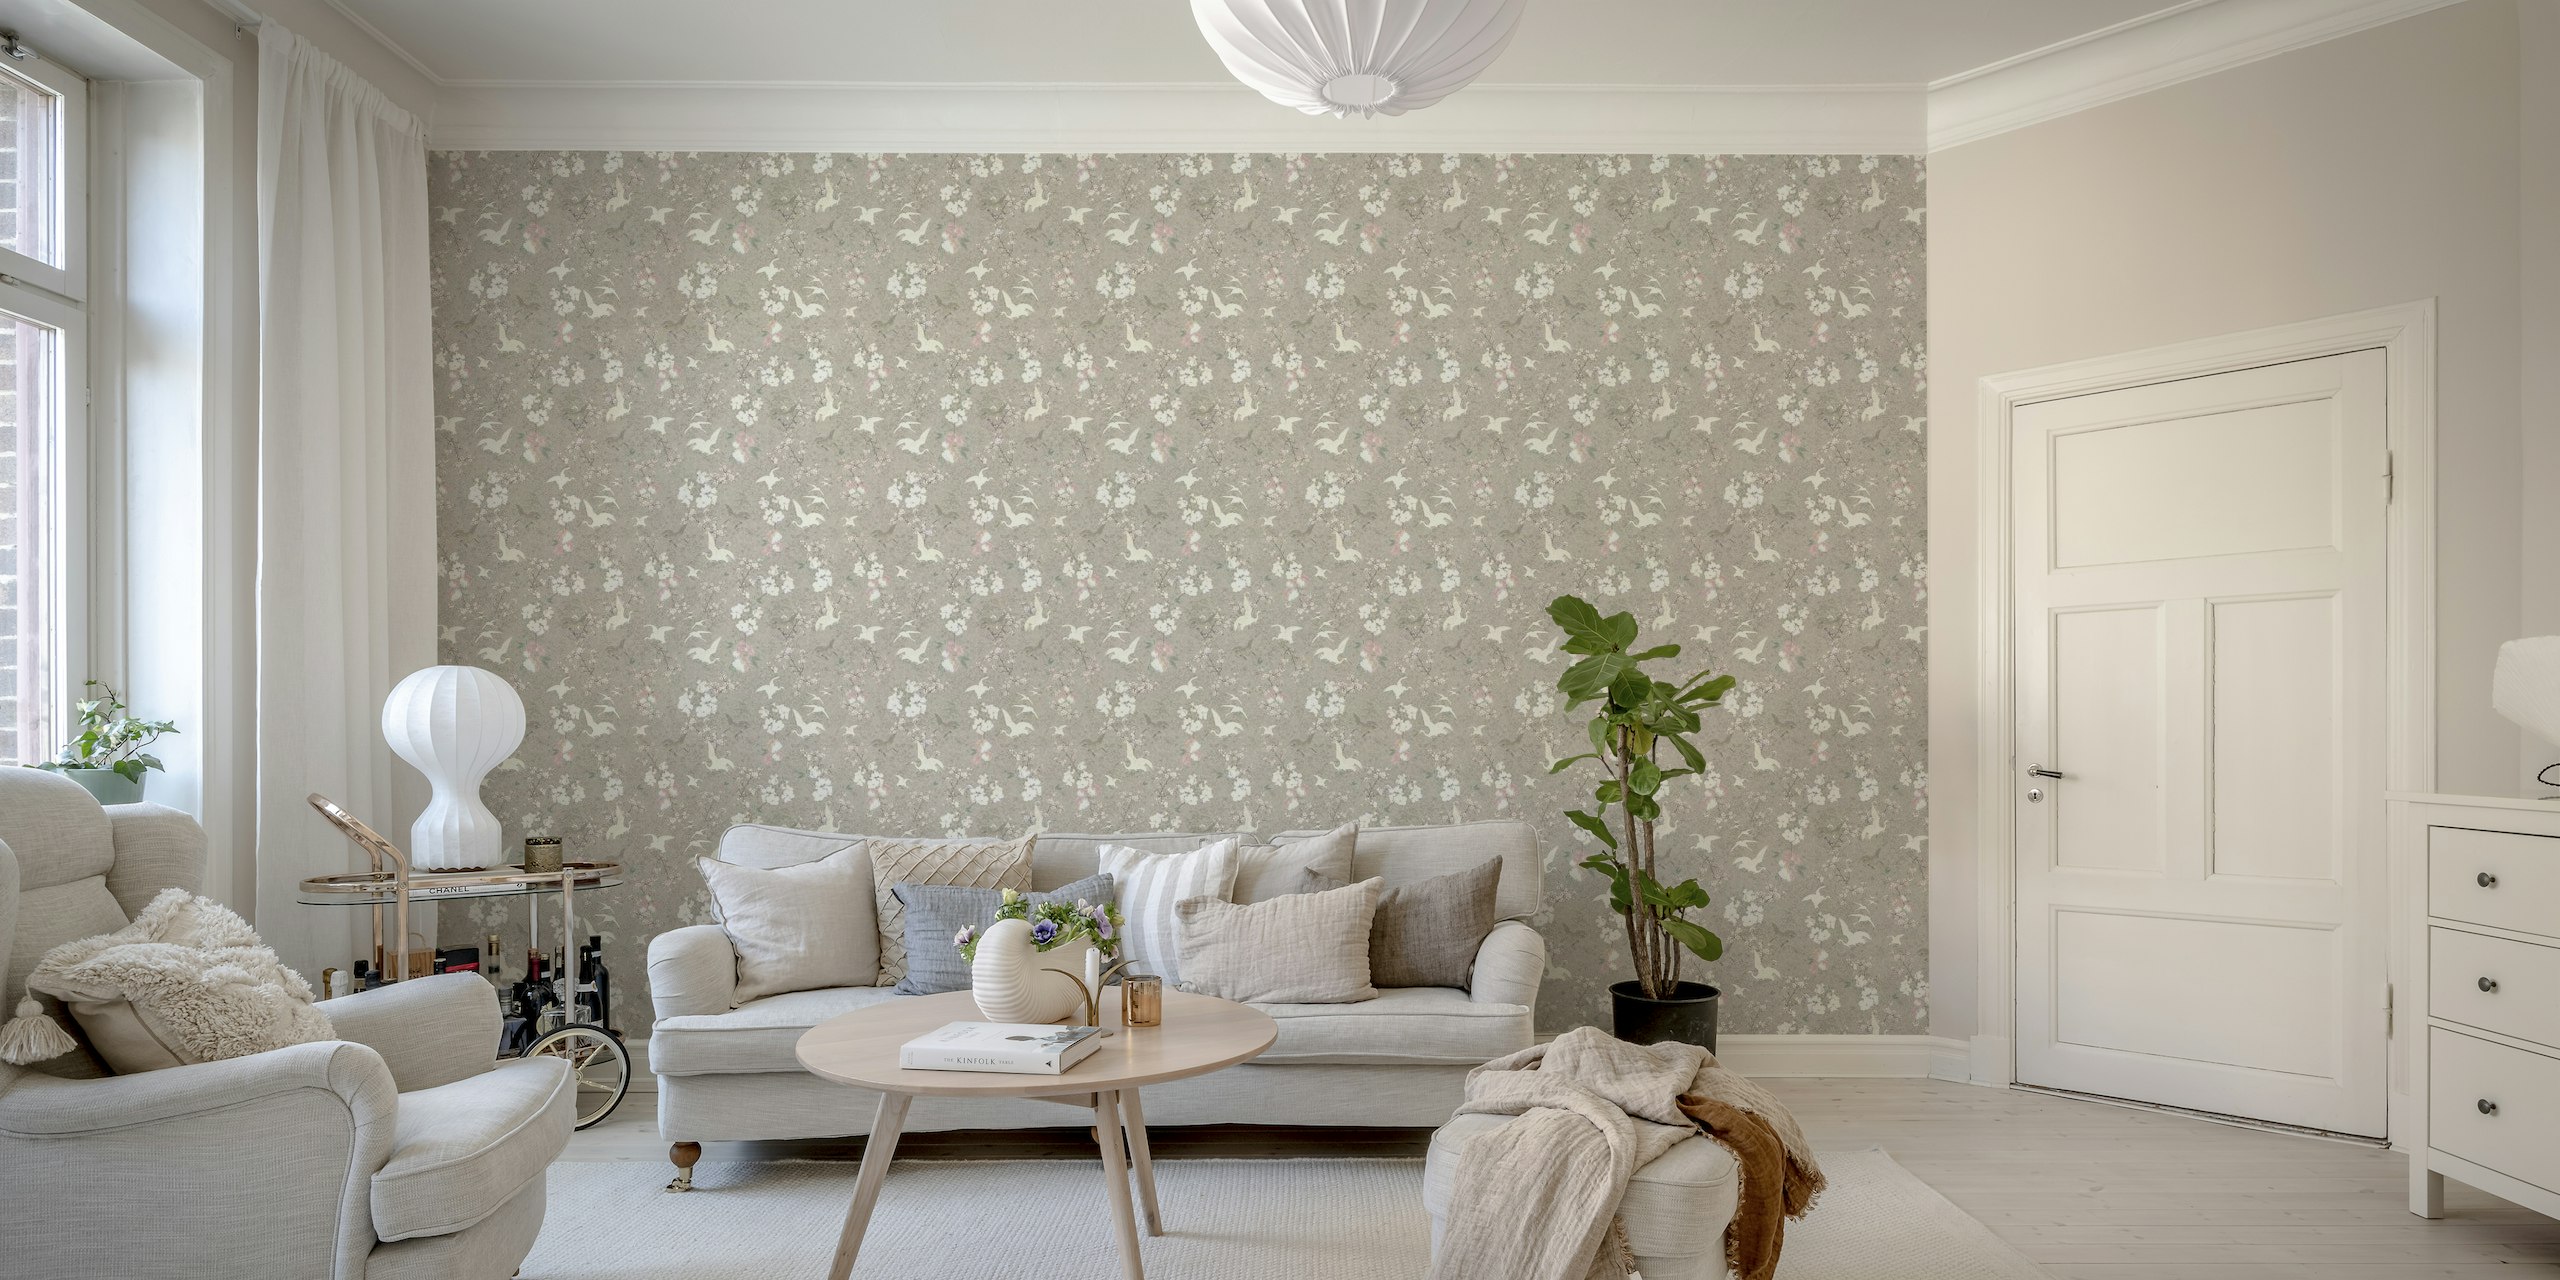 VINTAGE CHINOISERIE BIRDS AND FLORALS wallpaper